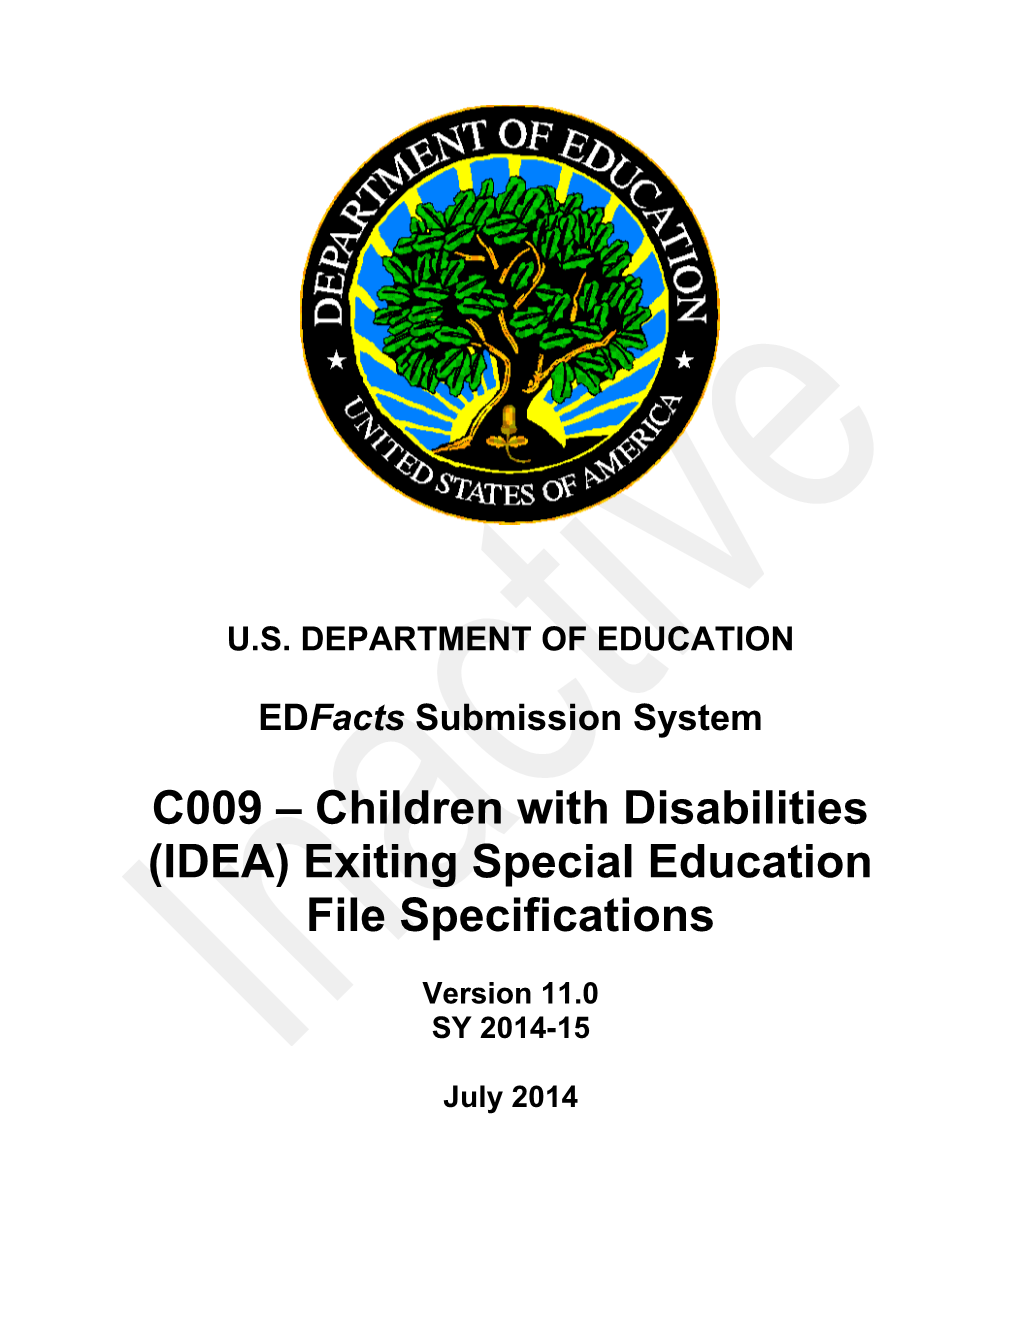 Children with Disabilities (IDEA) Exiting Special Education File Specifications